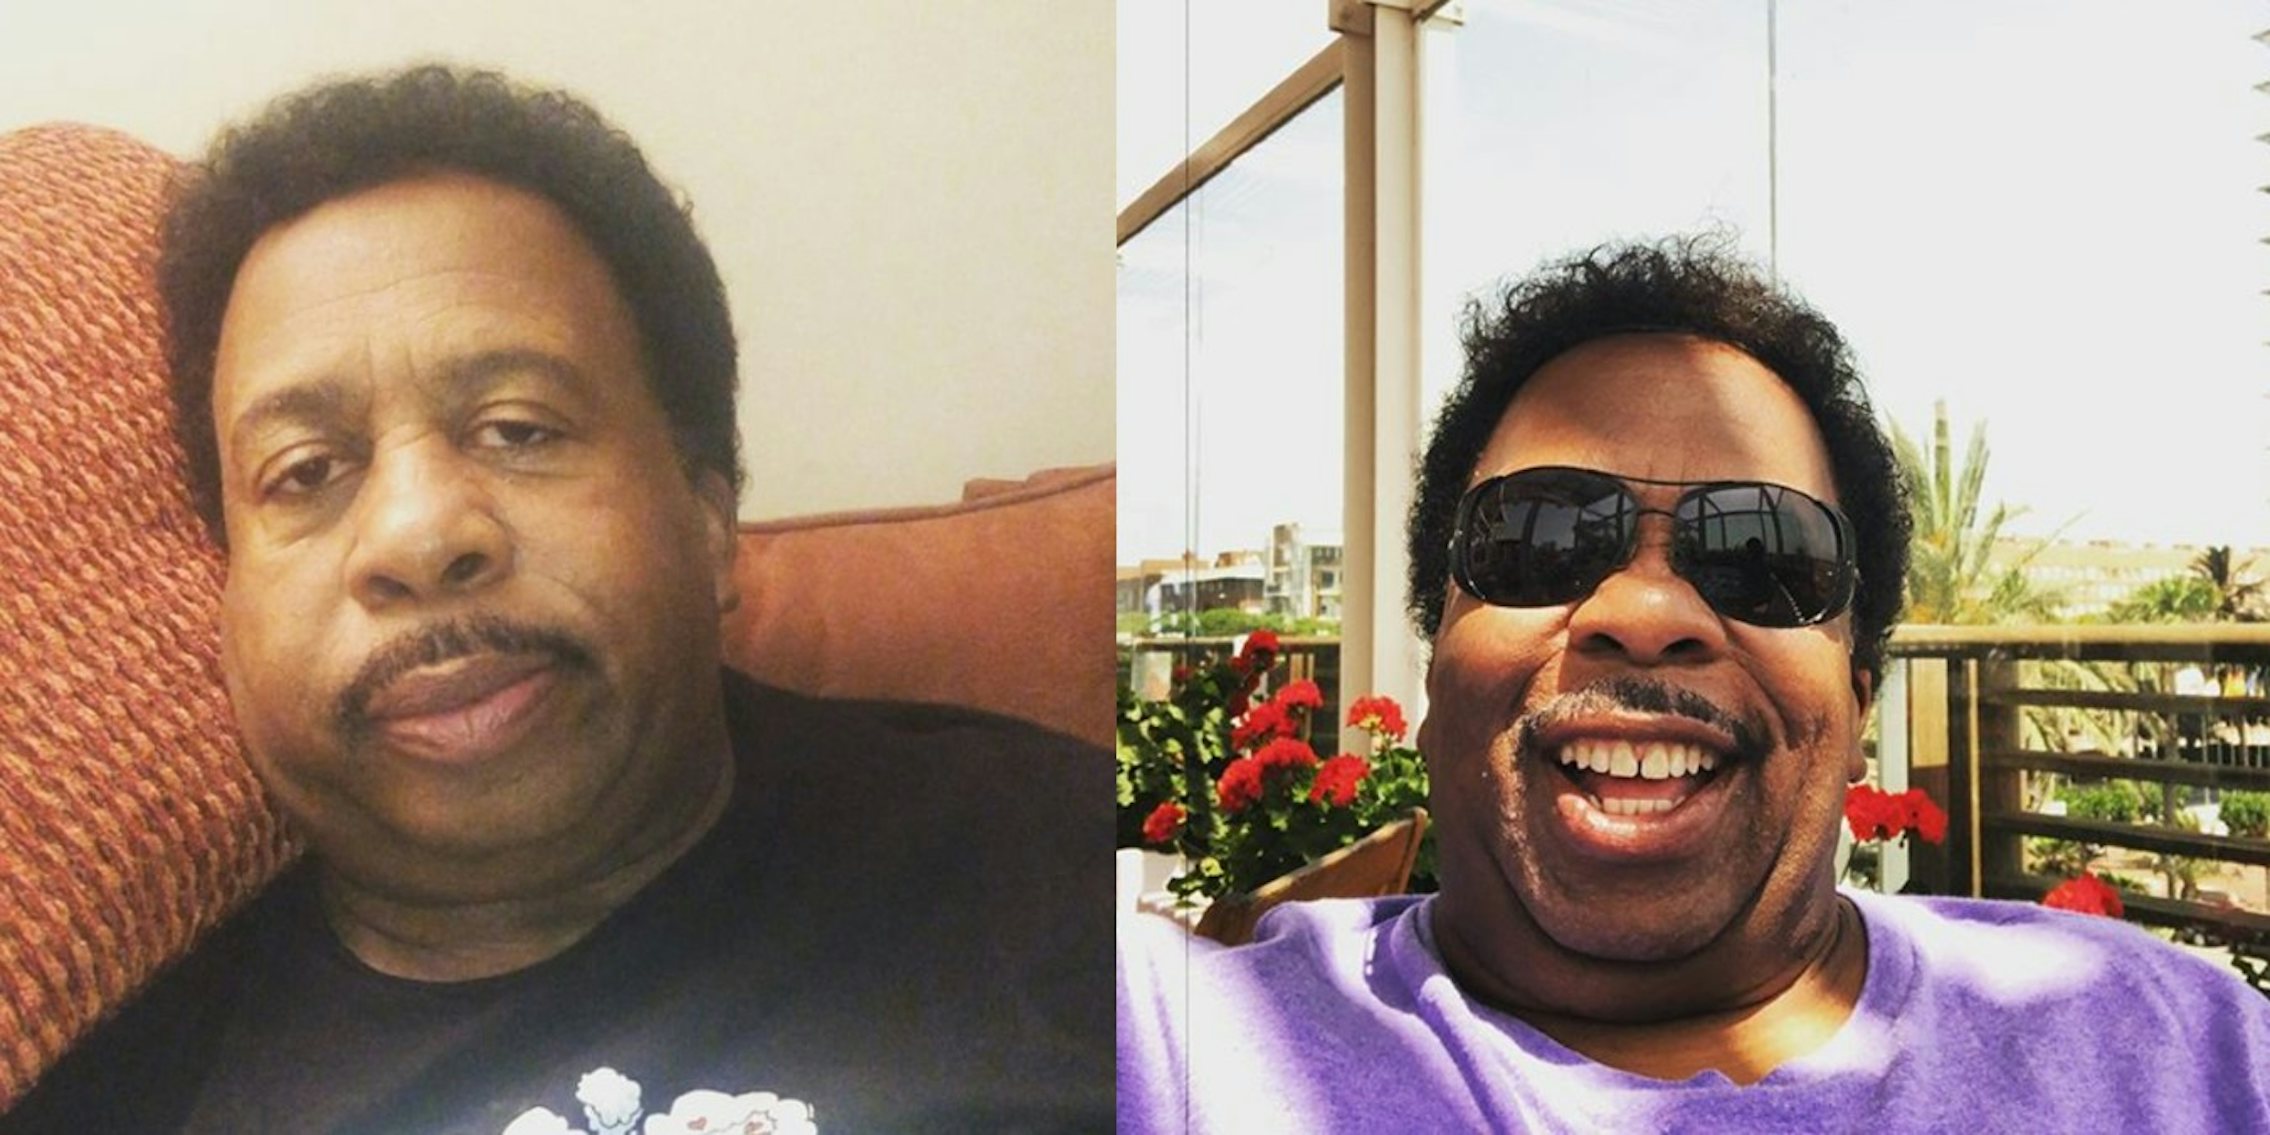 Leslie David Baker played the role of 'Stanley Hudson' in the Office